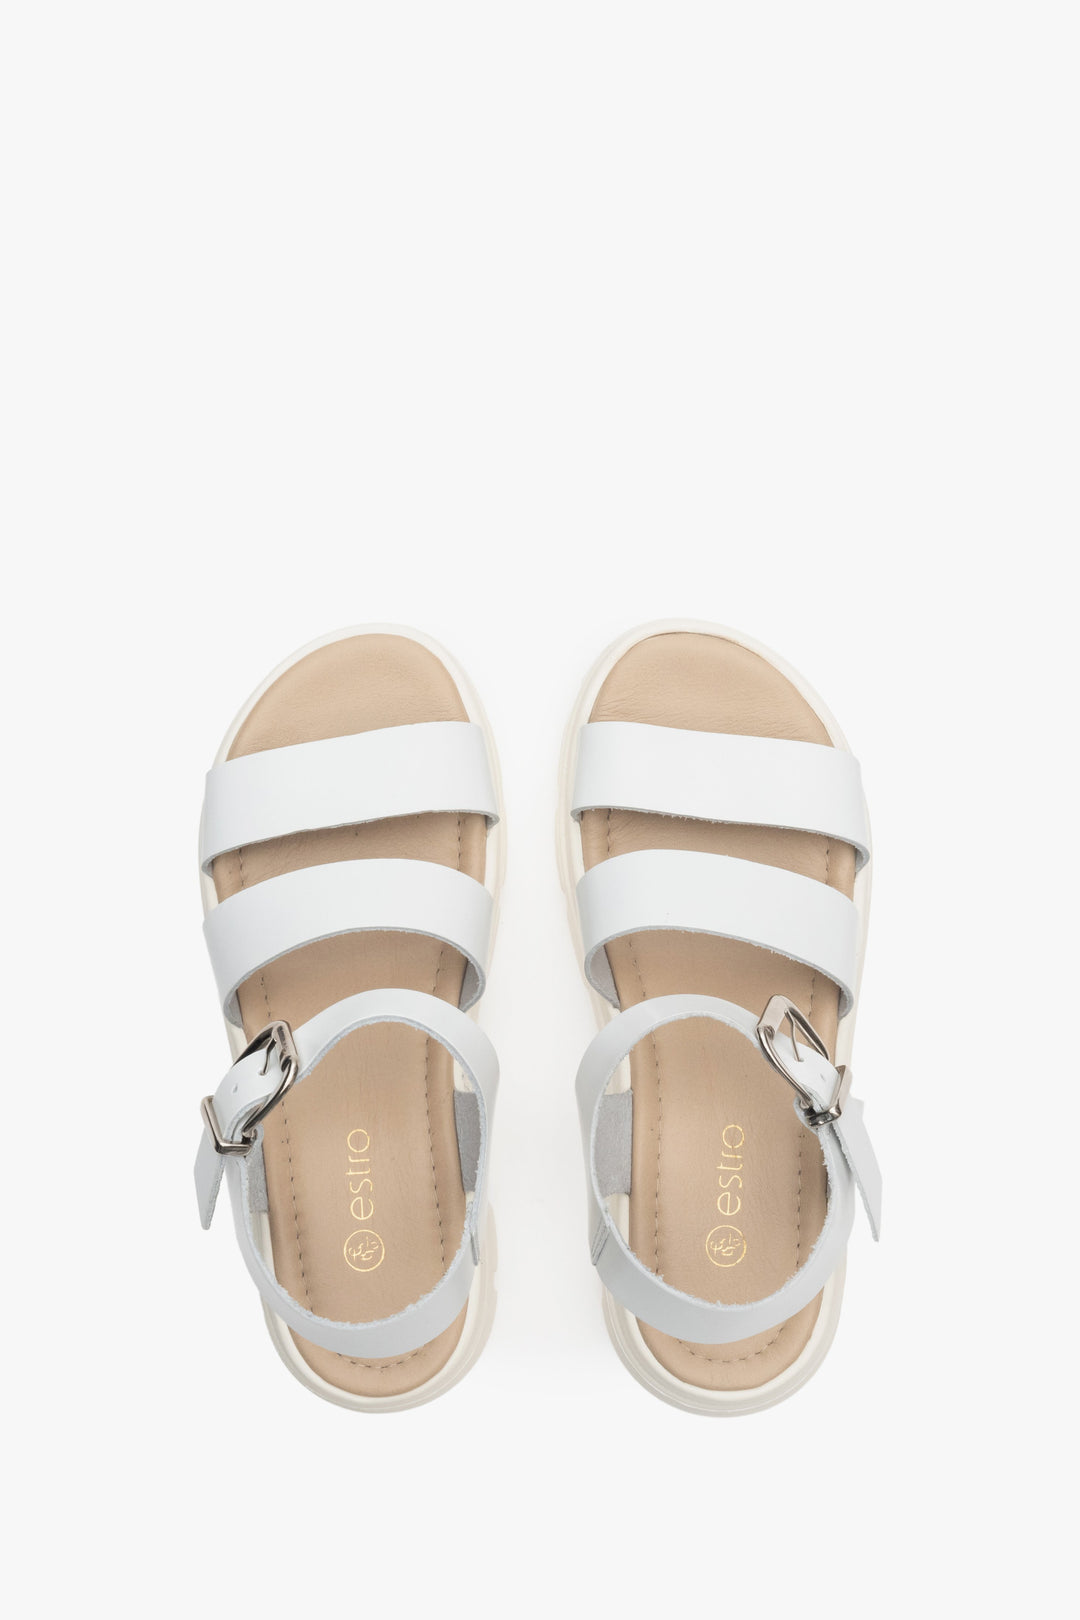 Women's sandals in white in natural leather Estro - presentation of footwear from above.